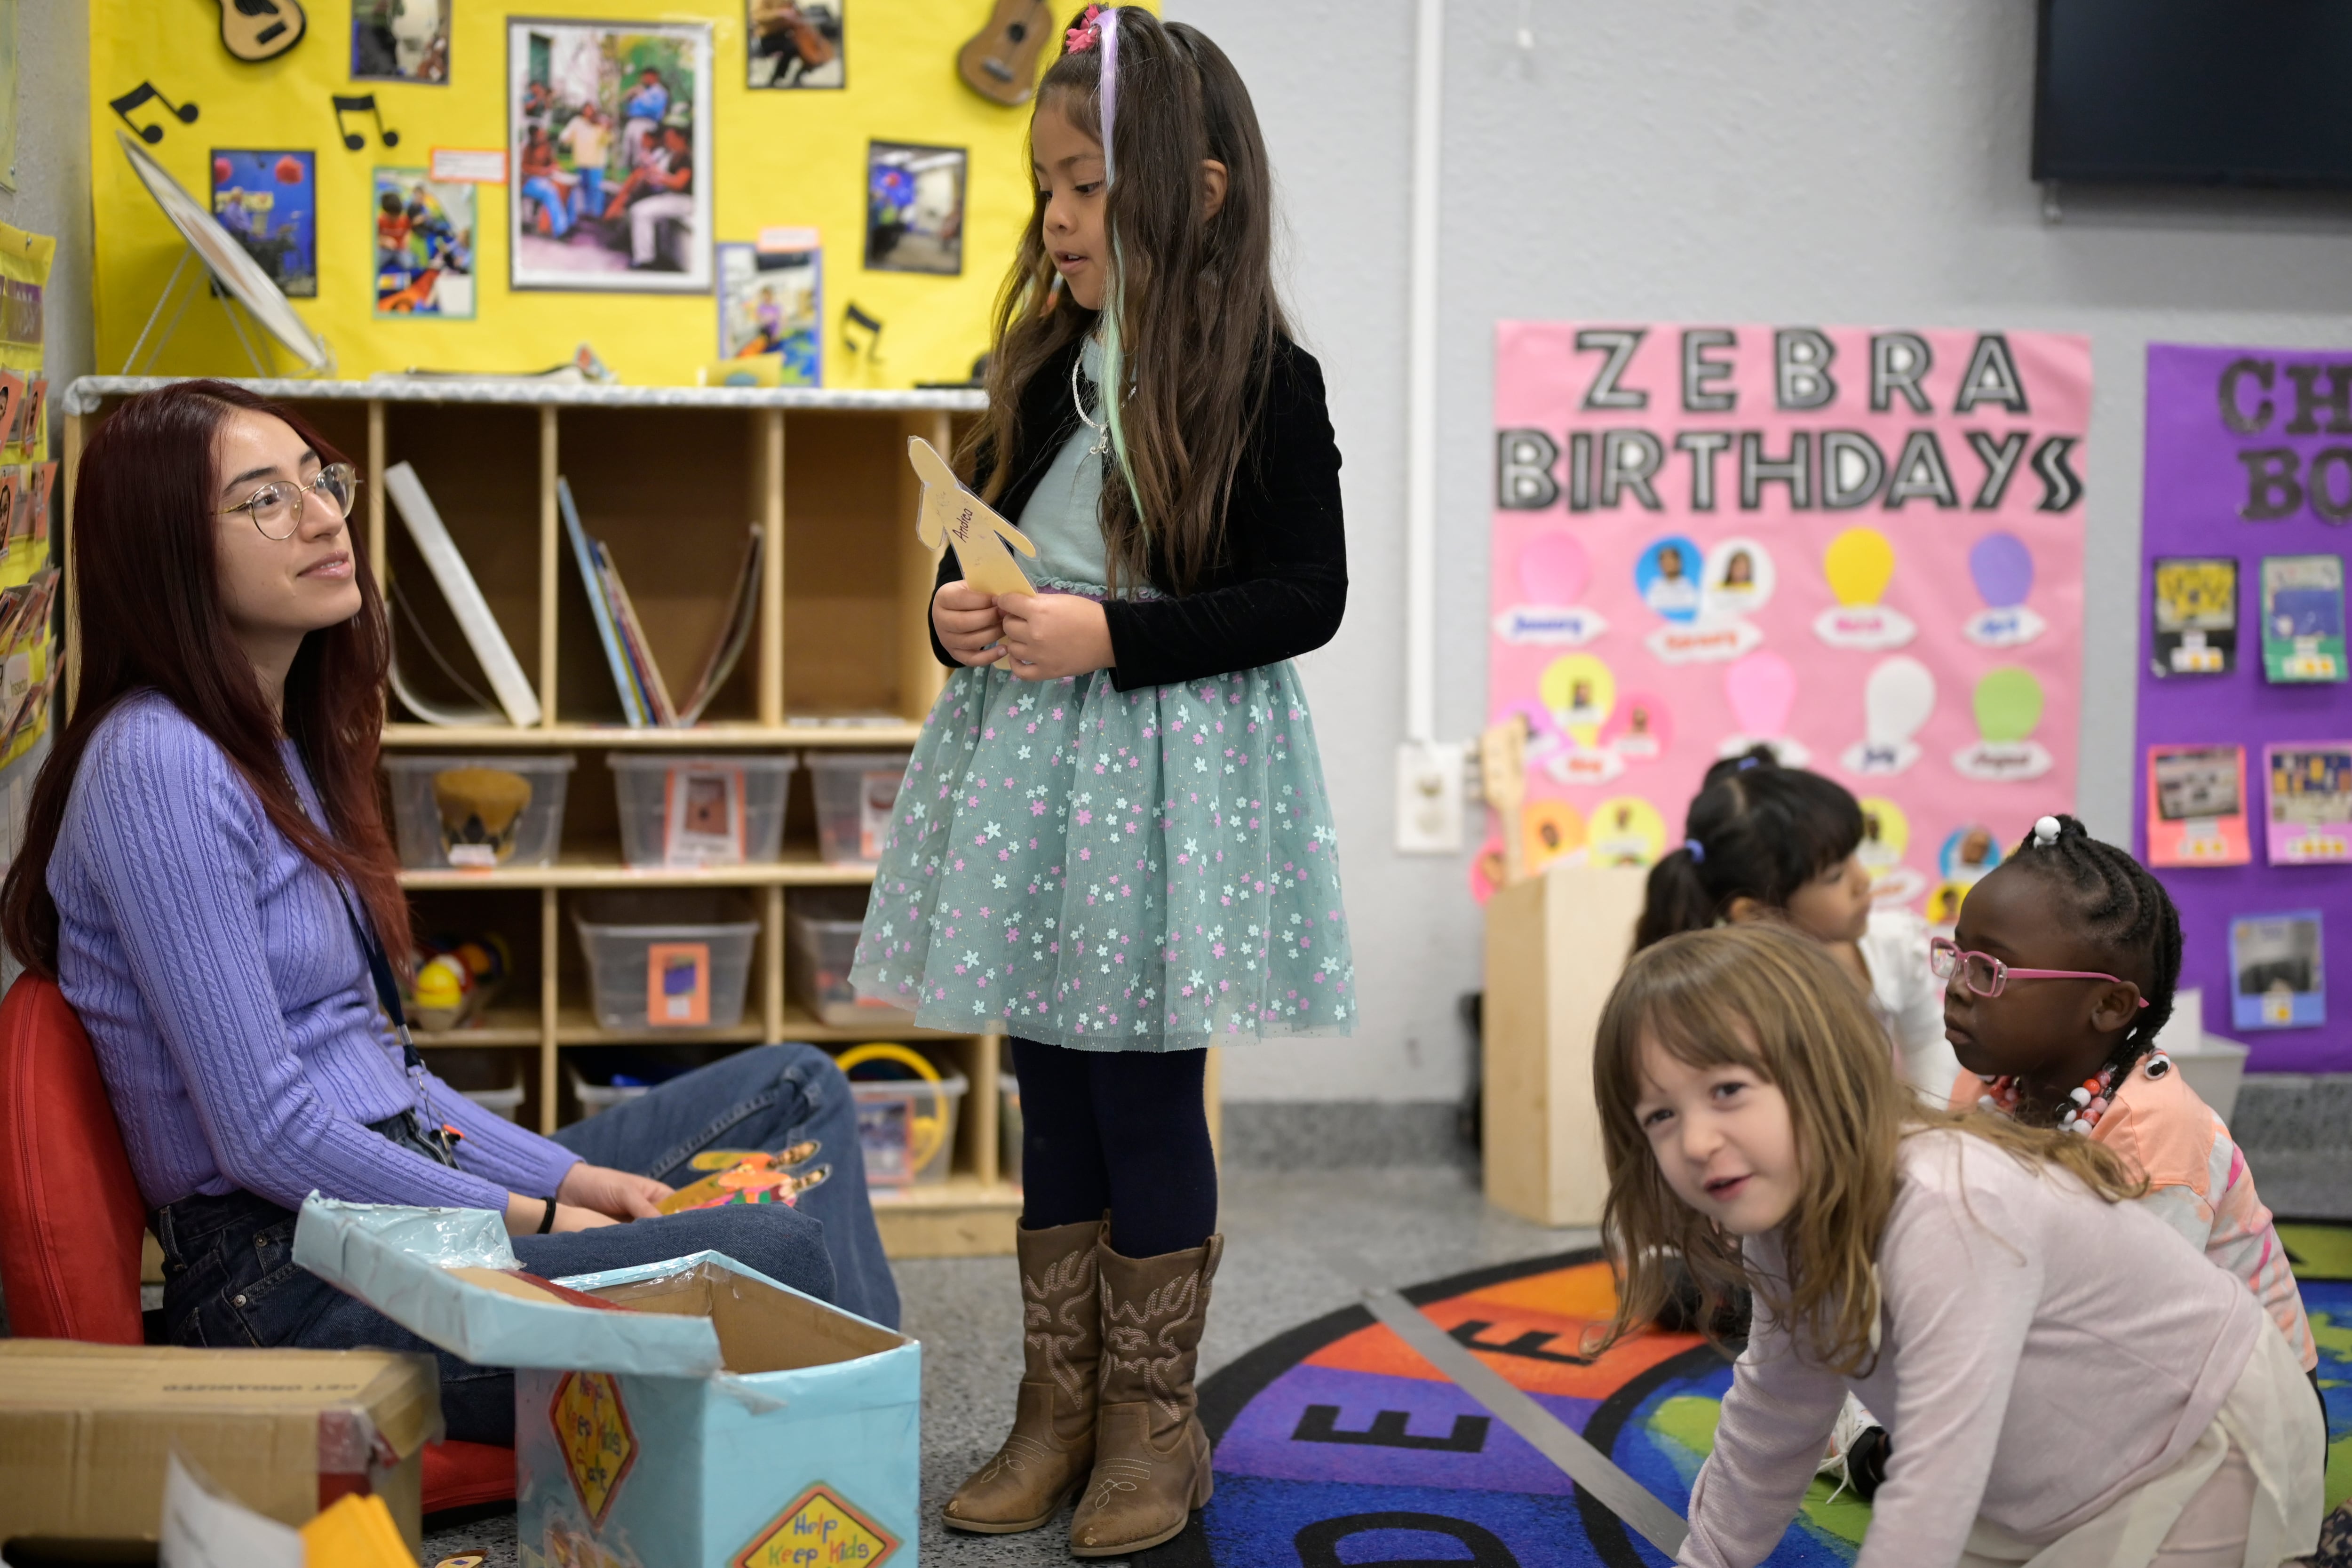 A young girl with long brown hair wearing a dress and cowboy boots is standing in front of a sitting teacher and there are other children on the classroom rug behind her.